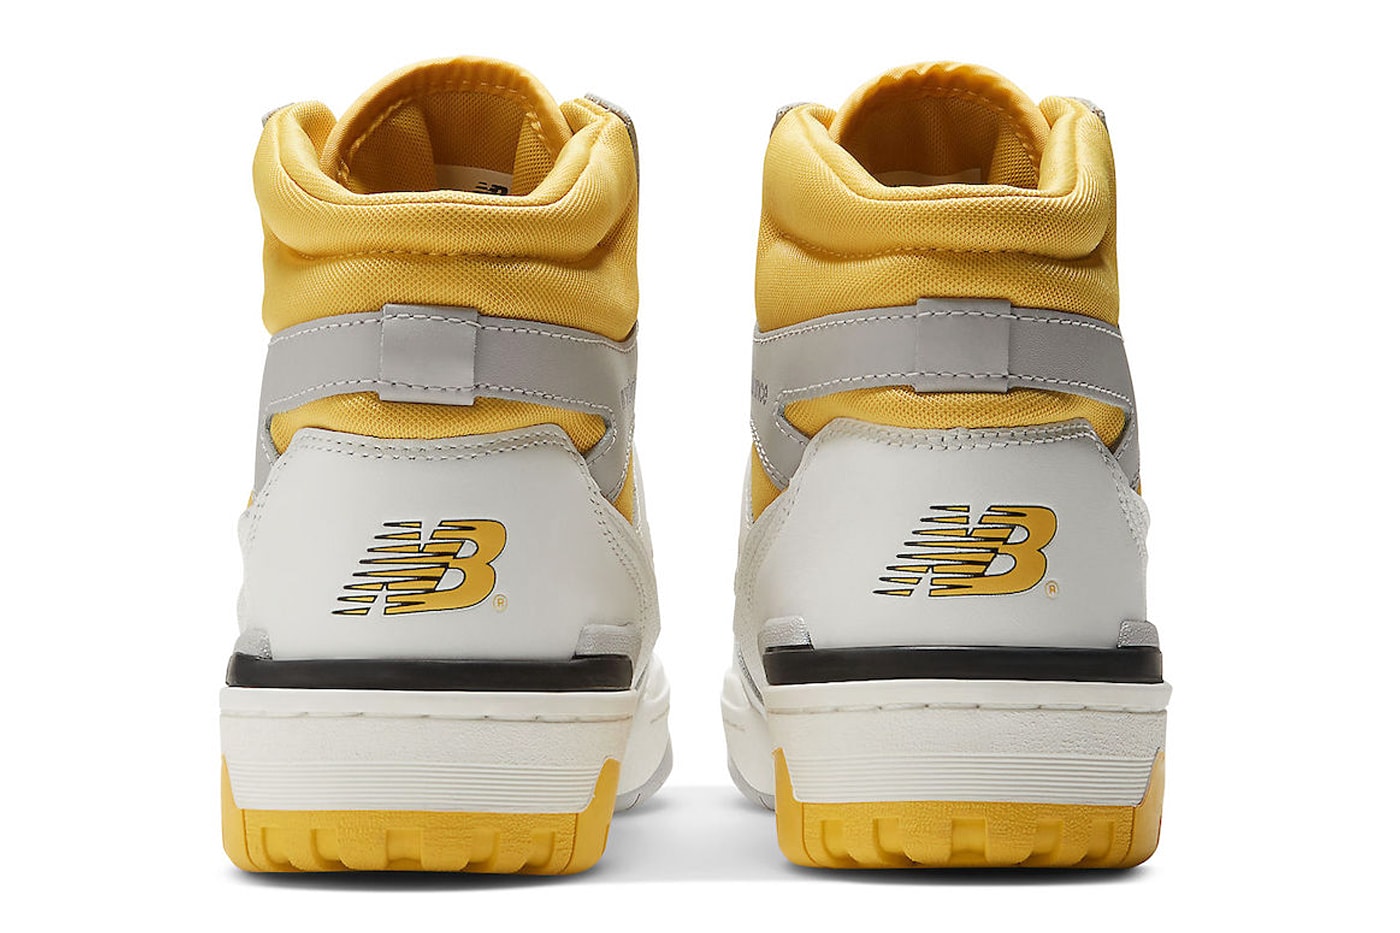 New Balance 650 Arrives in "Honeycomb" and "Interstellar" Colorways for Spring 2023  BB650RCF BB650RCG